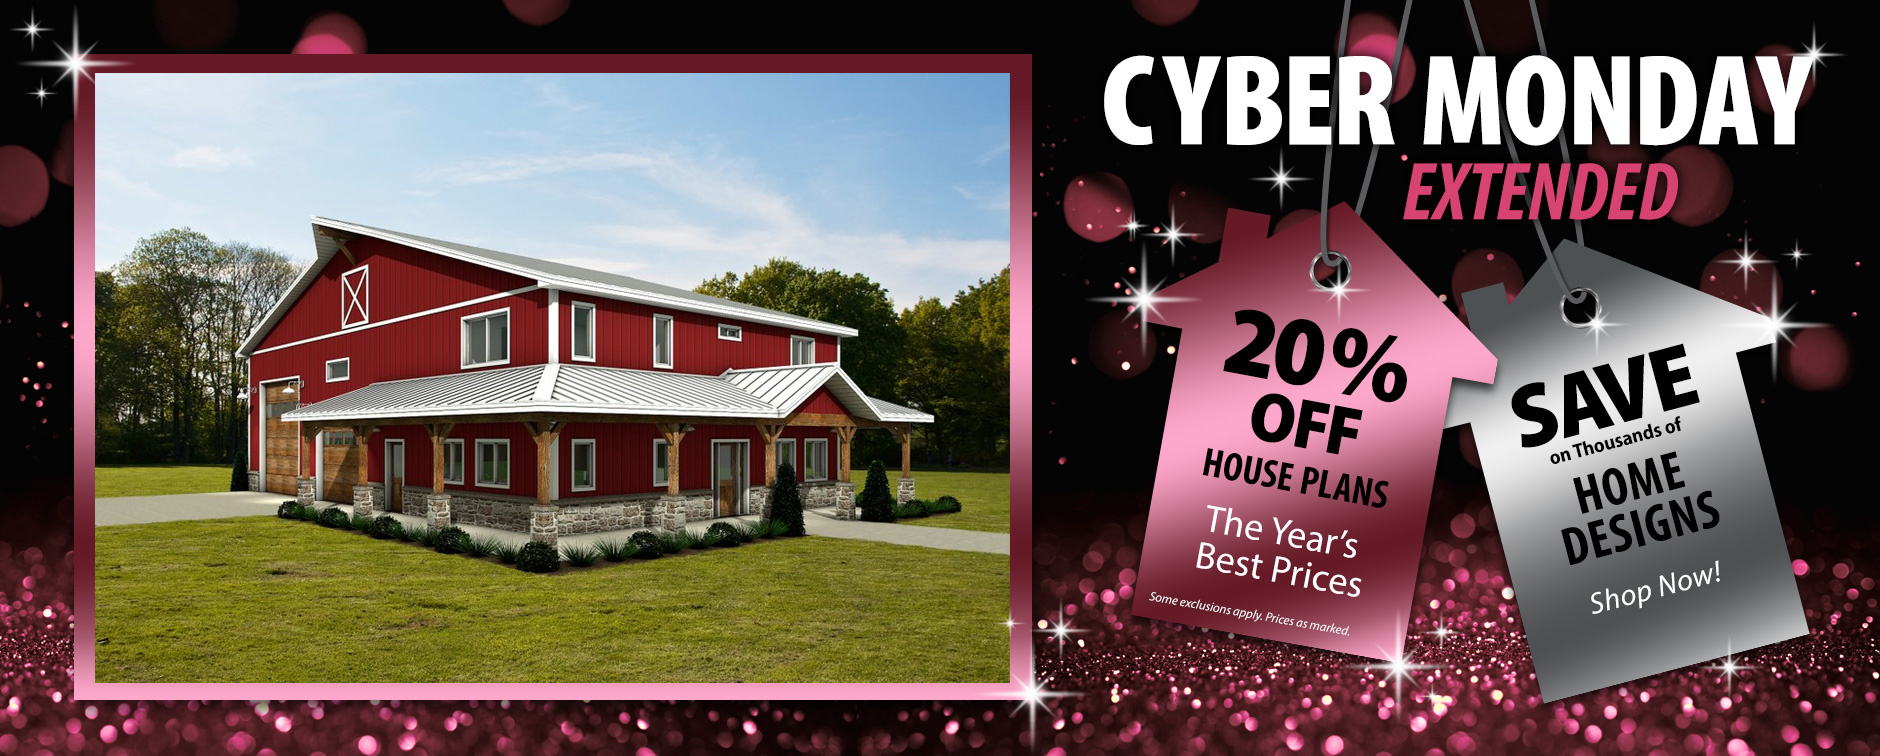 Cyber Monday Savings Extended: Get 20% Off House Plans